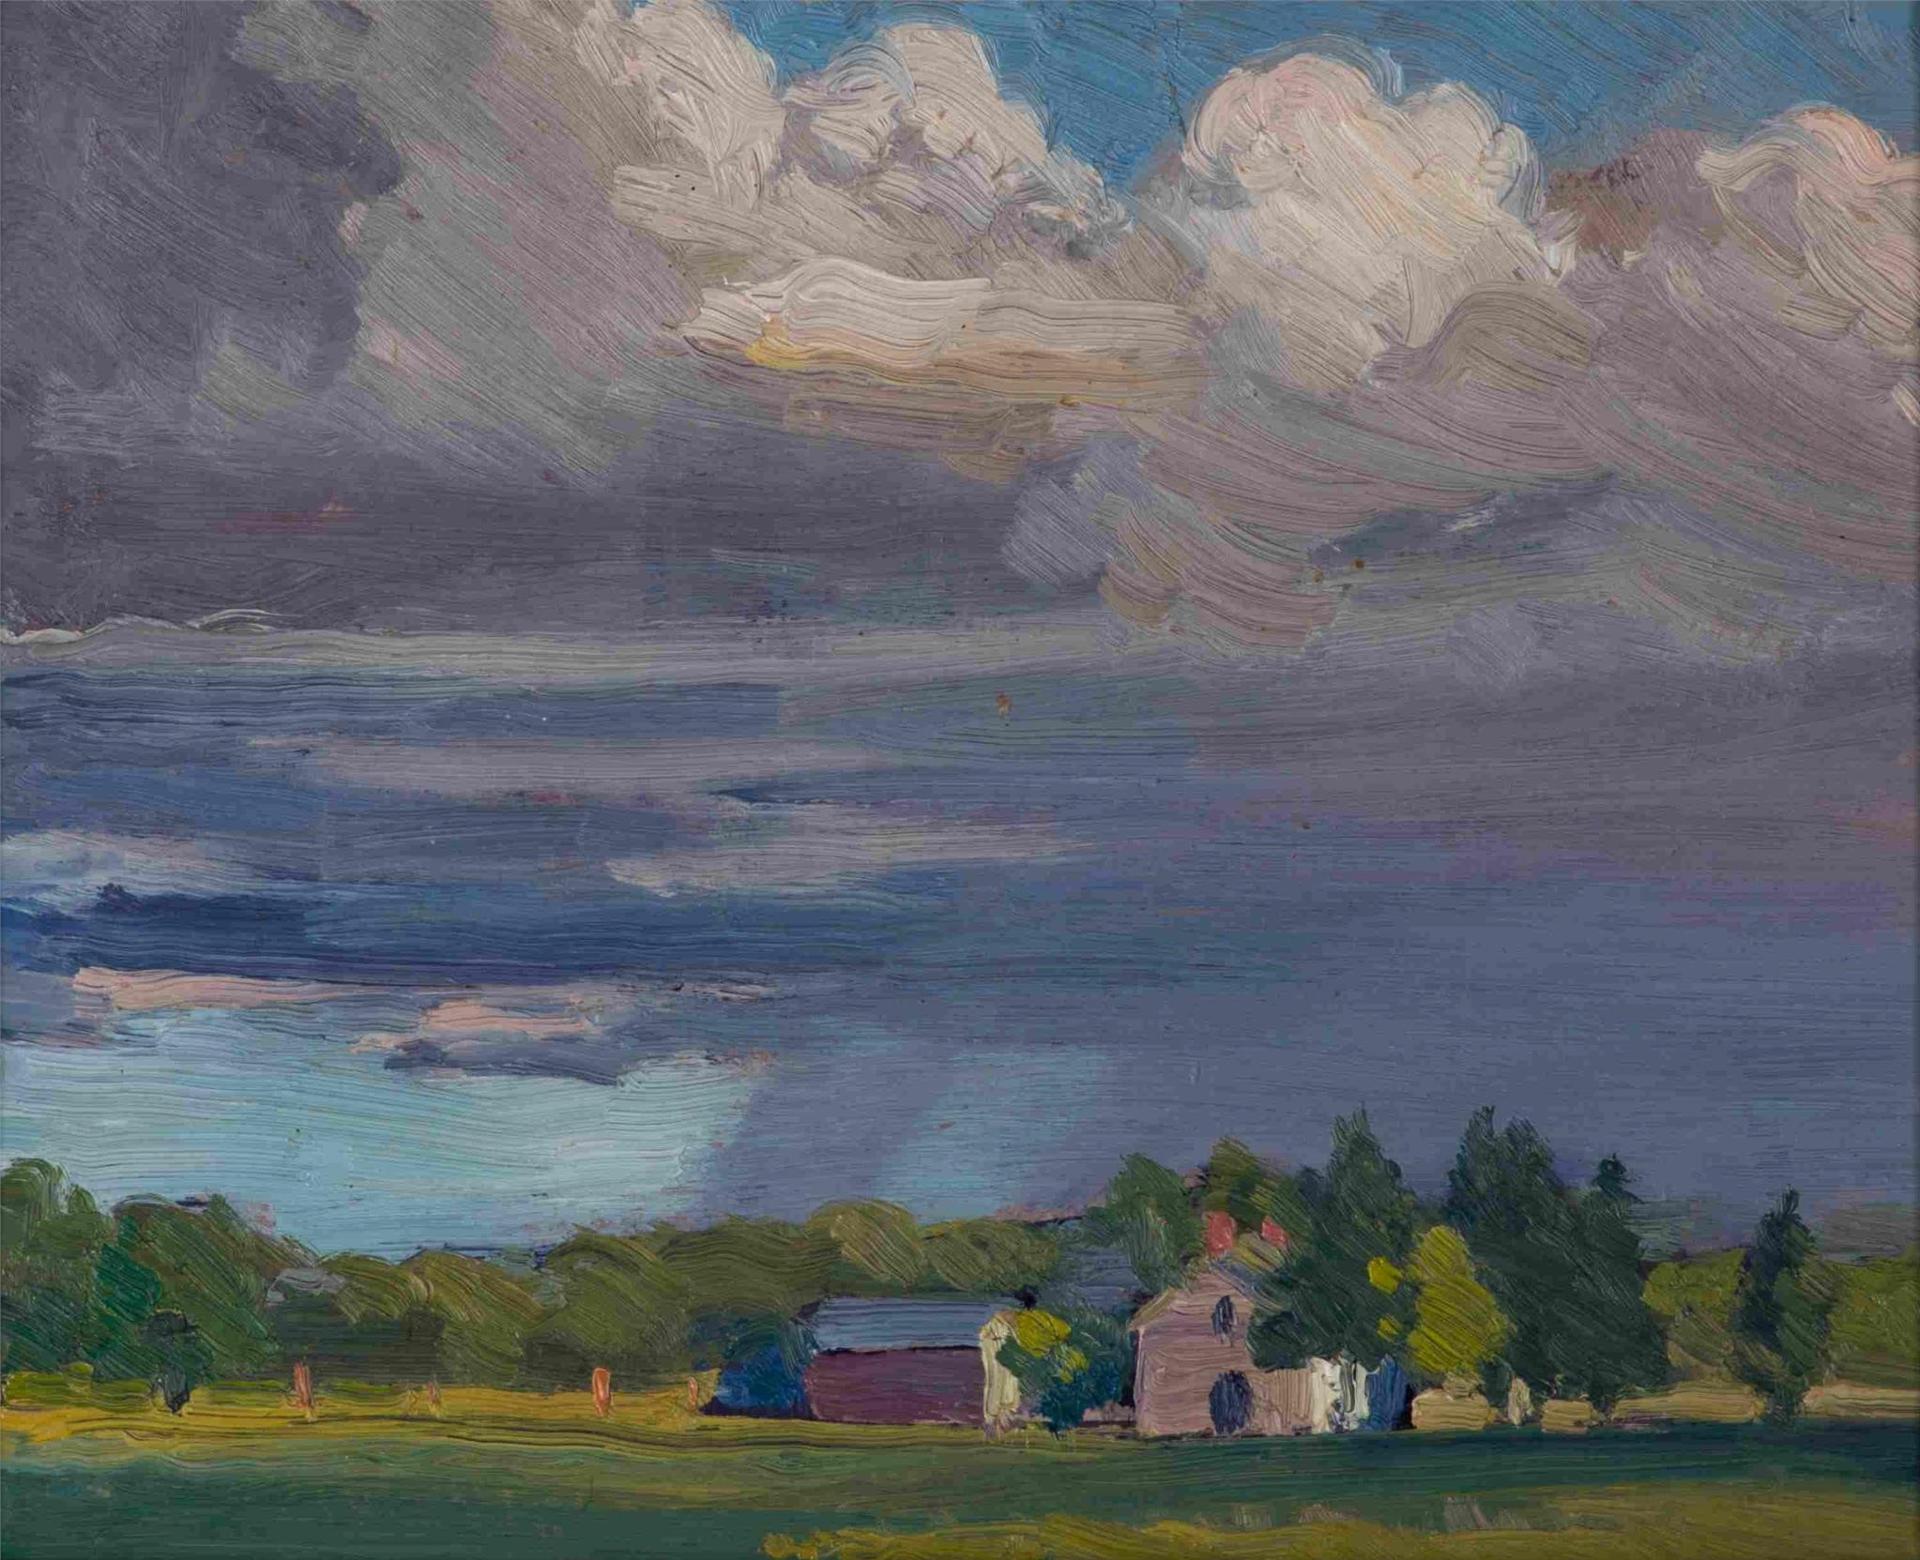 Sylvia Karen Hahn (1911-2001) - Booth's House, Thunderstorm to the South (1932)